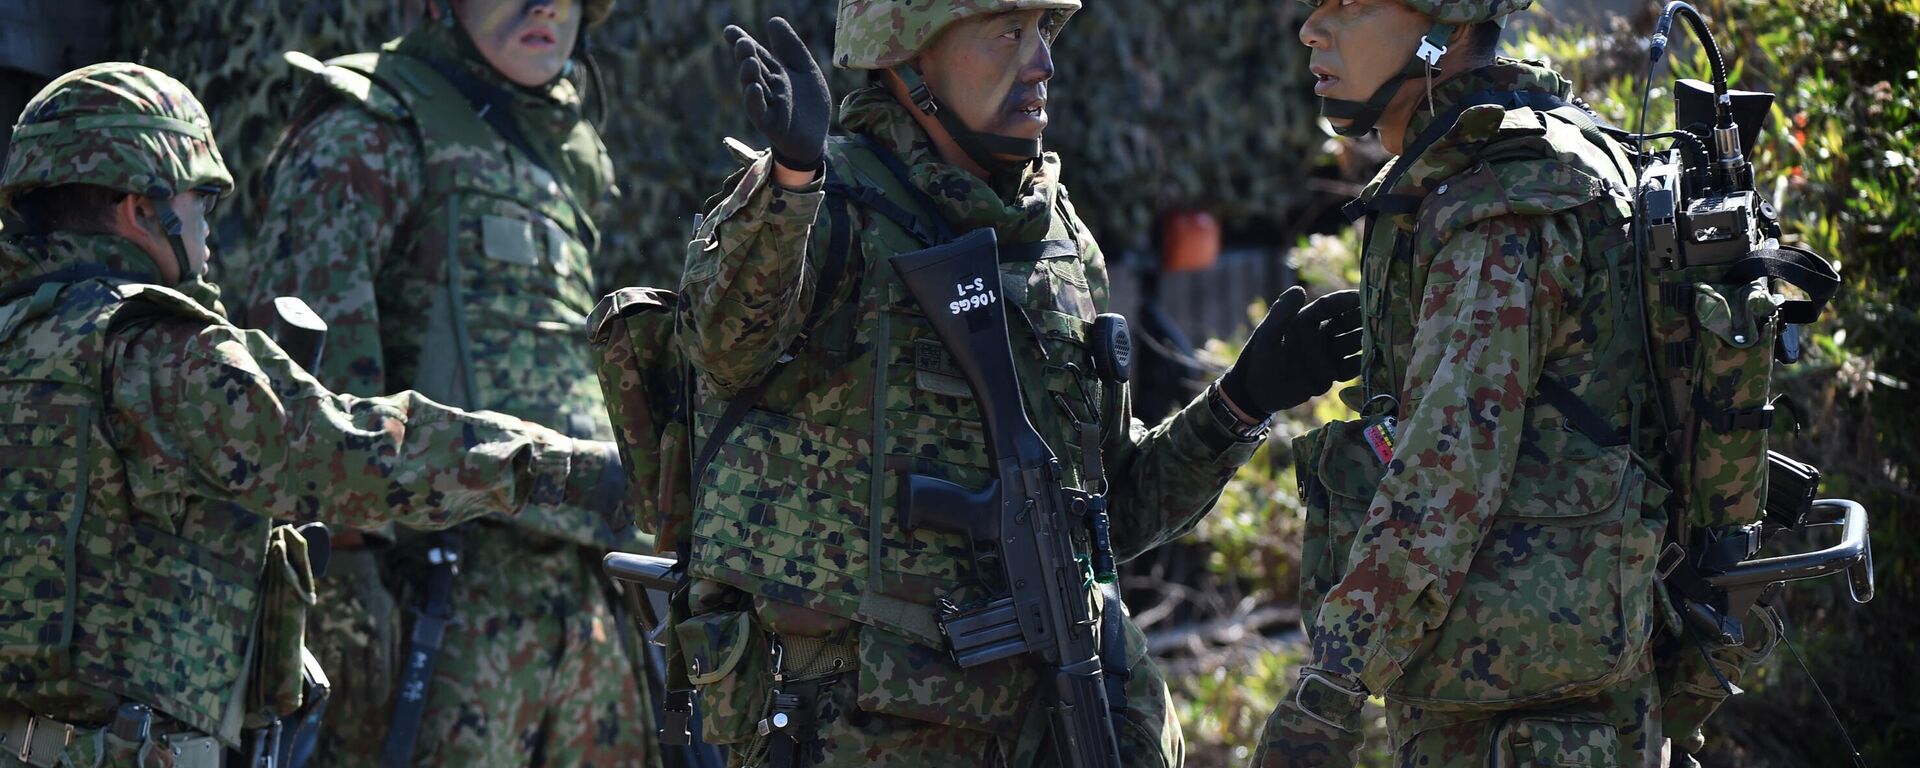 Japanese soldiers prepare during an amphibious landing operation with US Forces and the Japan Maritime Self-Defense Force (JMSDF) at the Dawn Blitz 2015 exercise in Camp Pendleton, California on September 5, 2015 - Sputnik International, 1920, 16.03.2023